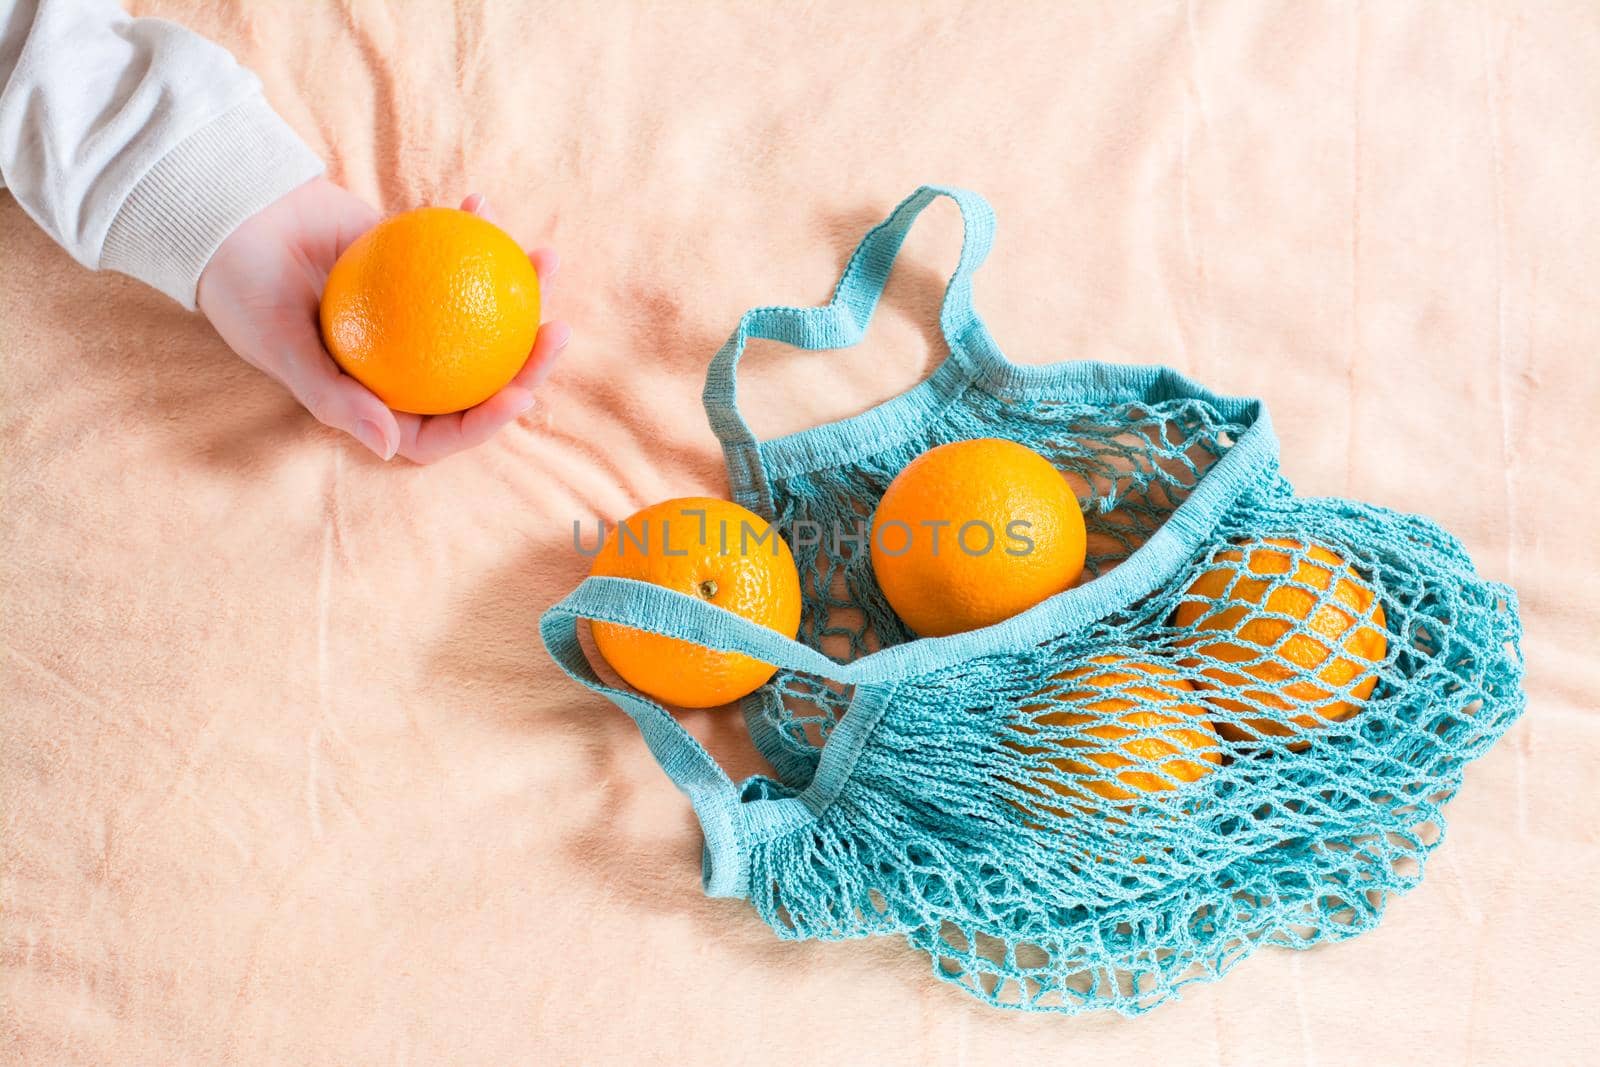 A female hand pulls out fresh oranges from a mesh bag on a fabric background. Zero waste